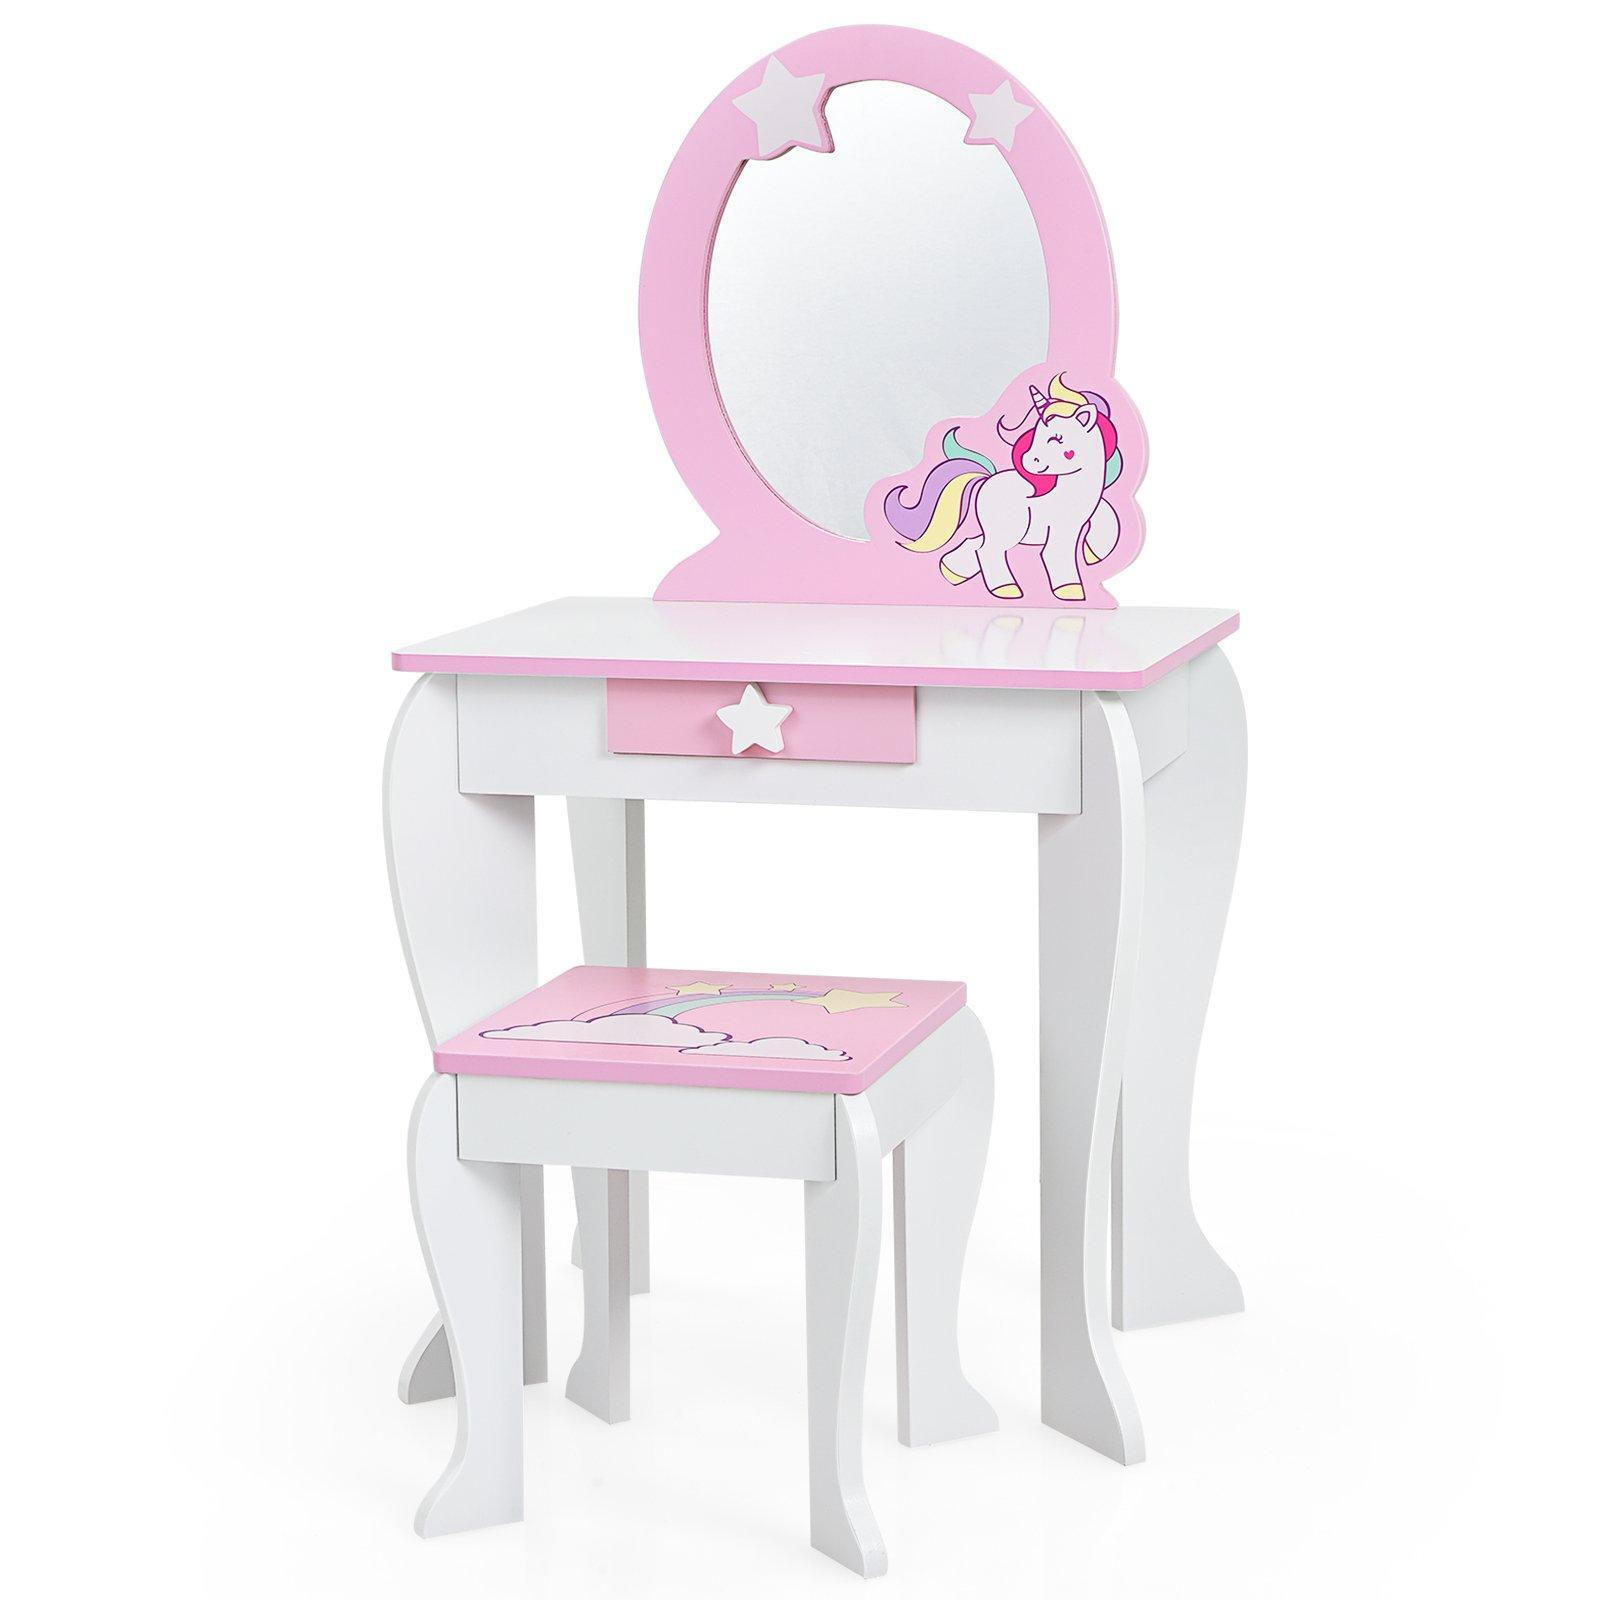 Kids Vanity Table and Chair Set Children Makeup Dressing Table w/ Mirror & Stool - image 1